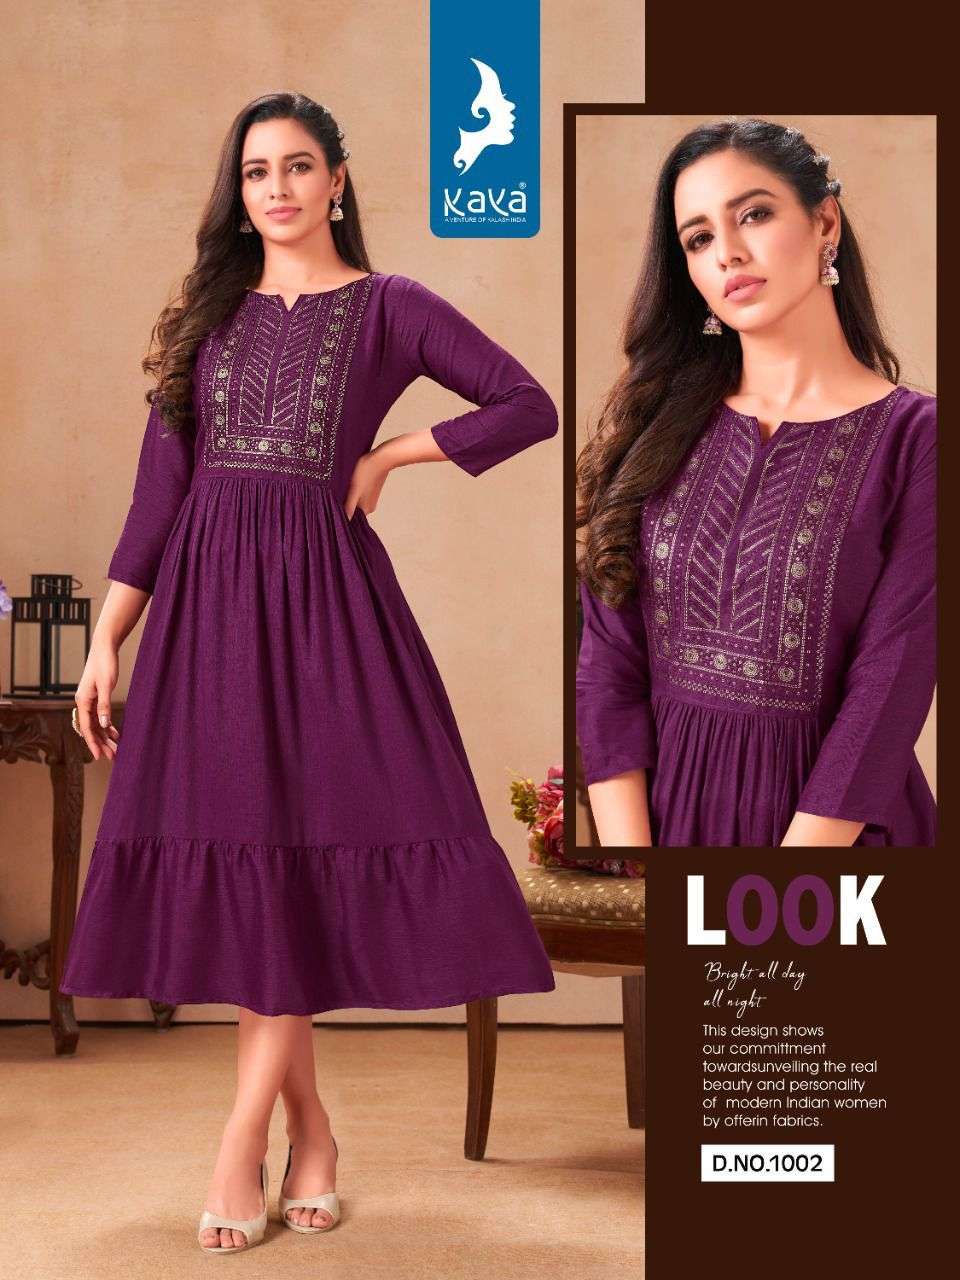 Which is the best place to buy kurtis for resale in ahmedabad? - Quora